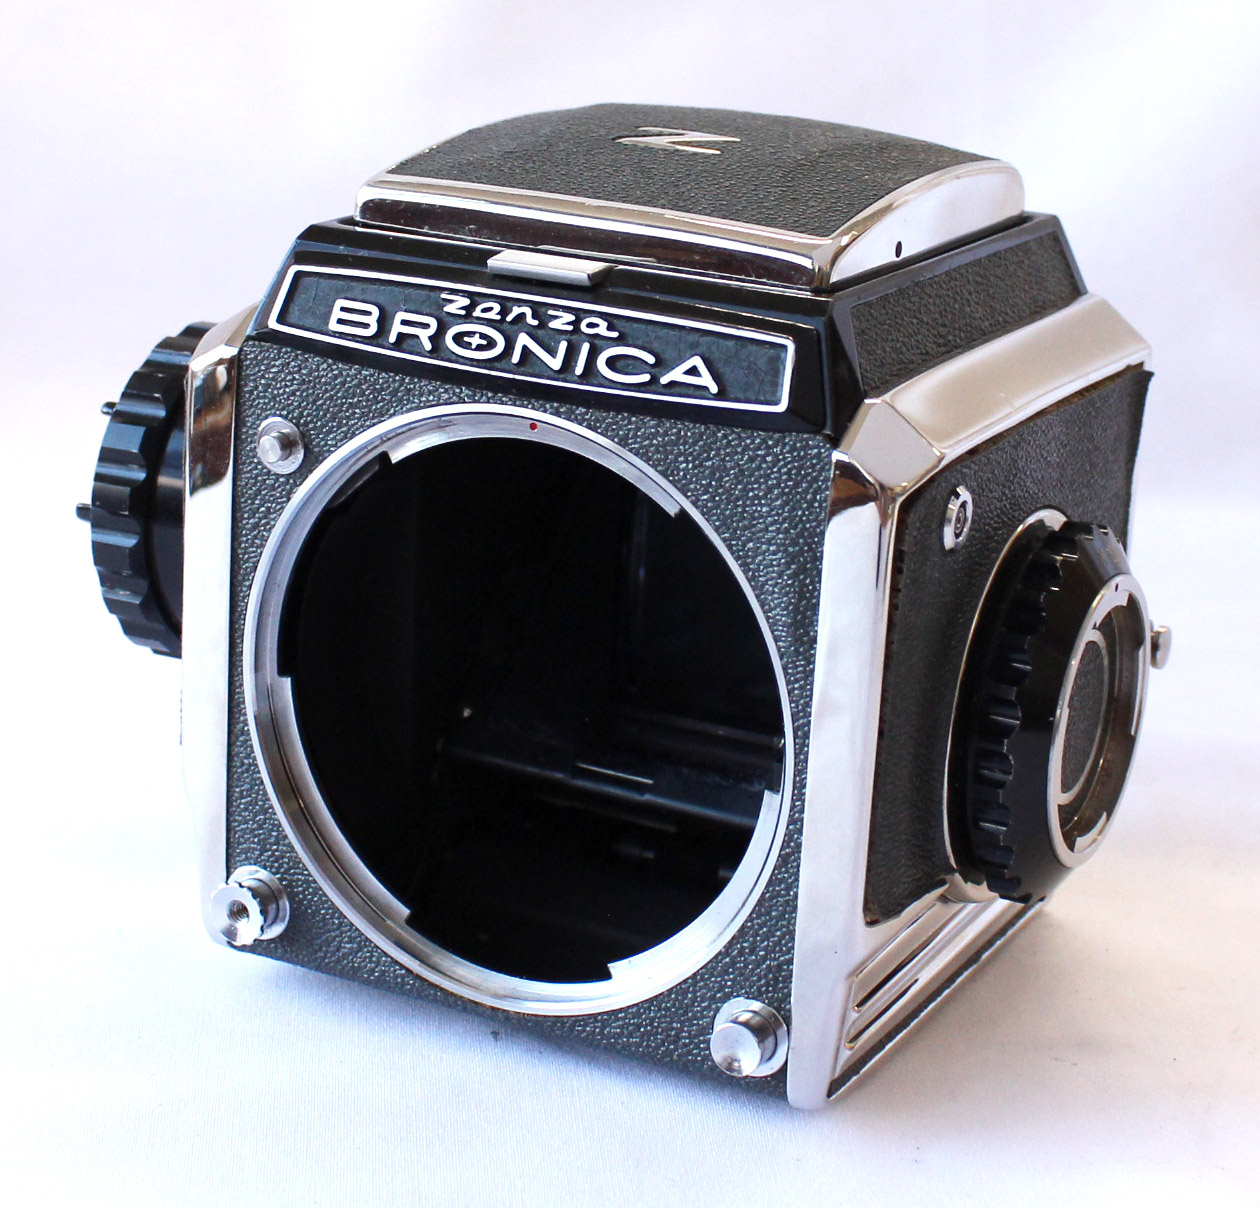 Zenza Bronica S2A Final Model (S/N CB156*) w/ Zenzanon MC 75mm F/2.8 and 6x6 Film Back from Japan Photo 1